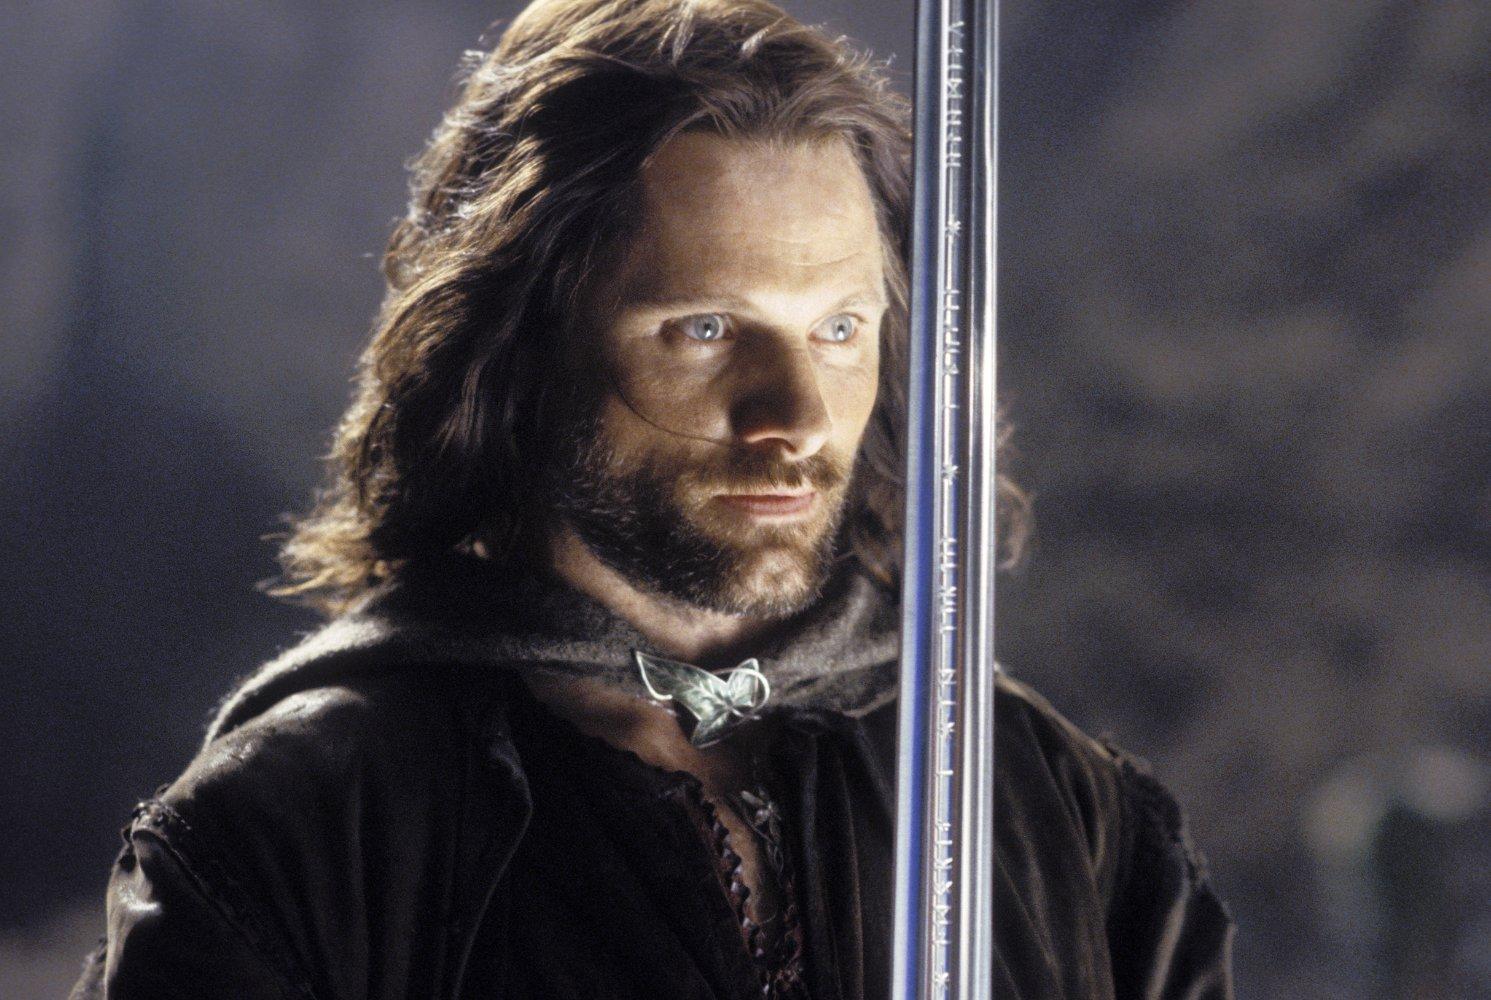 2004- The Lord of the Rings: The Return of the King سيد الخواتم: عودة الملك